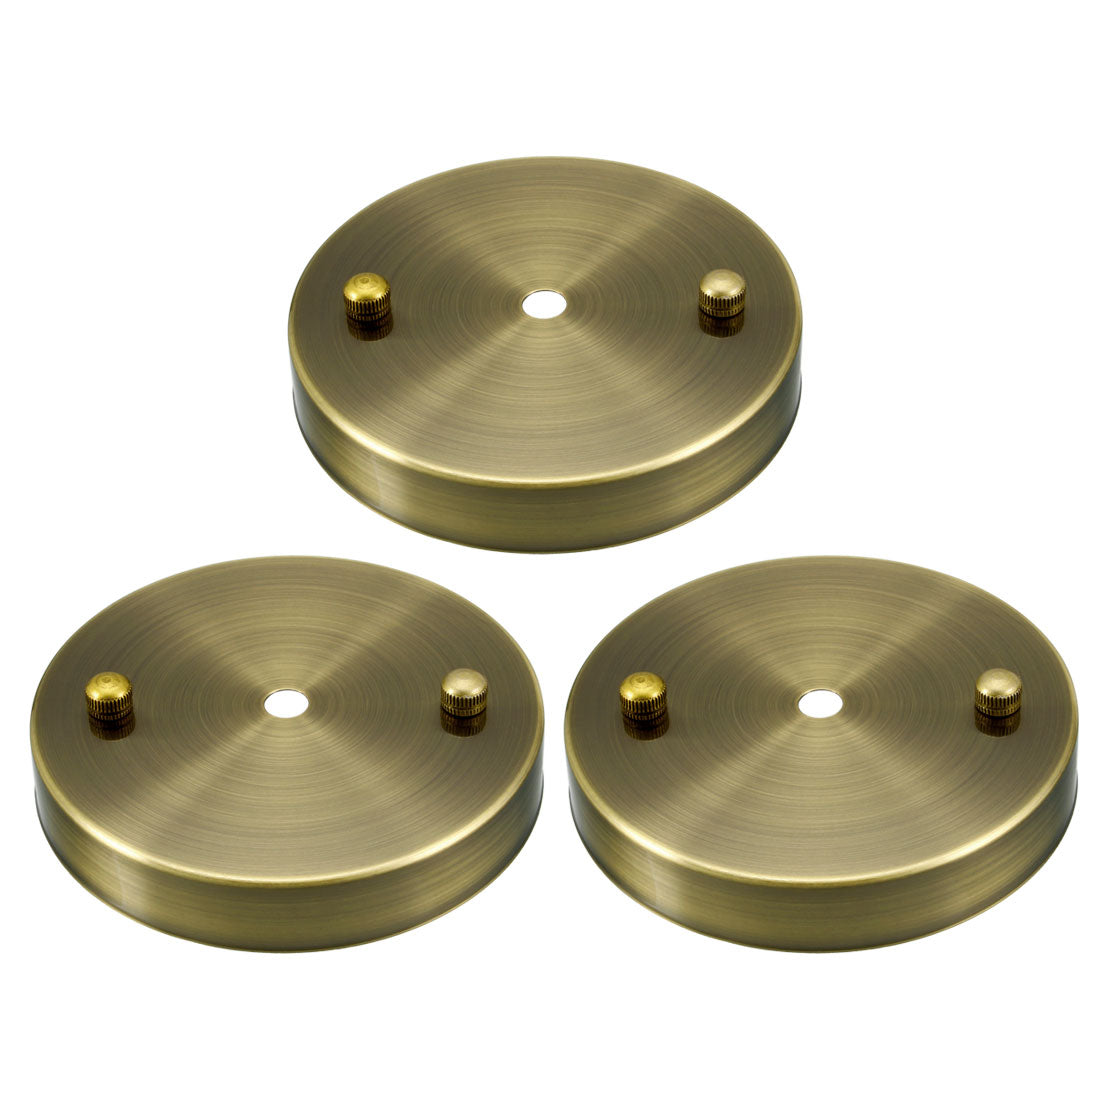 uxcell Uxcell Retro Ceiling Light Plate Pointed Base Chassis Disc Pendant Accessories 120mmx20mm Bronze Tone w Screw 3pcs